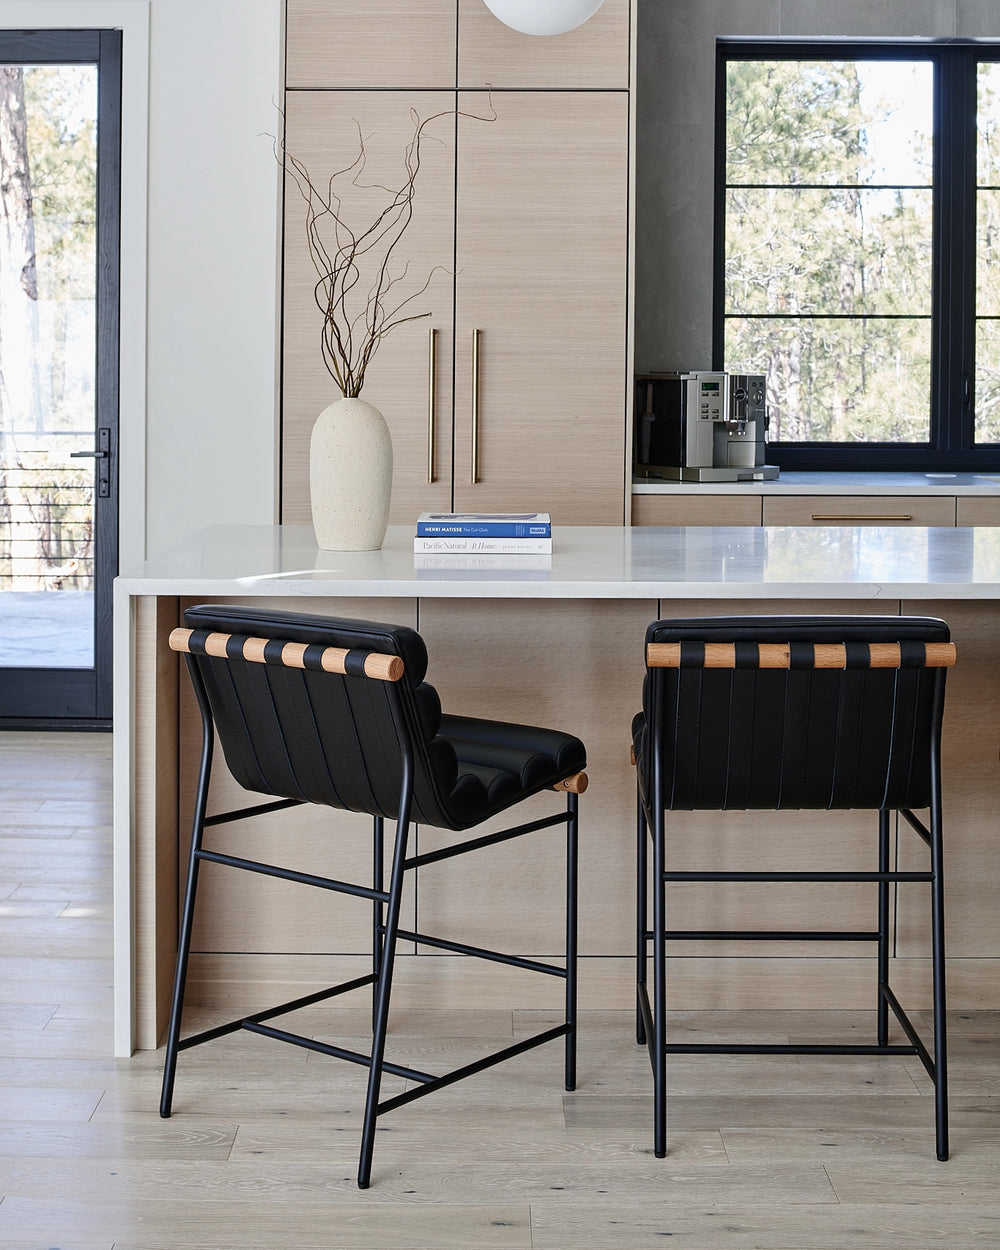 Elegant black leather Vail Counter Stools complement a modern kitchen's neutral palette and clean lines.